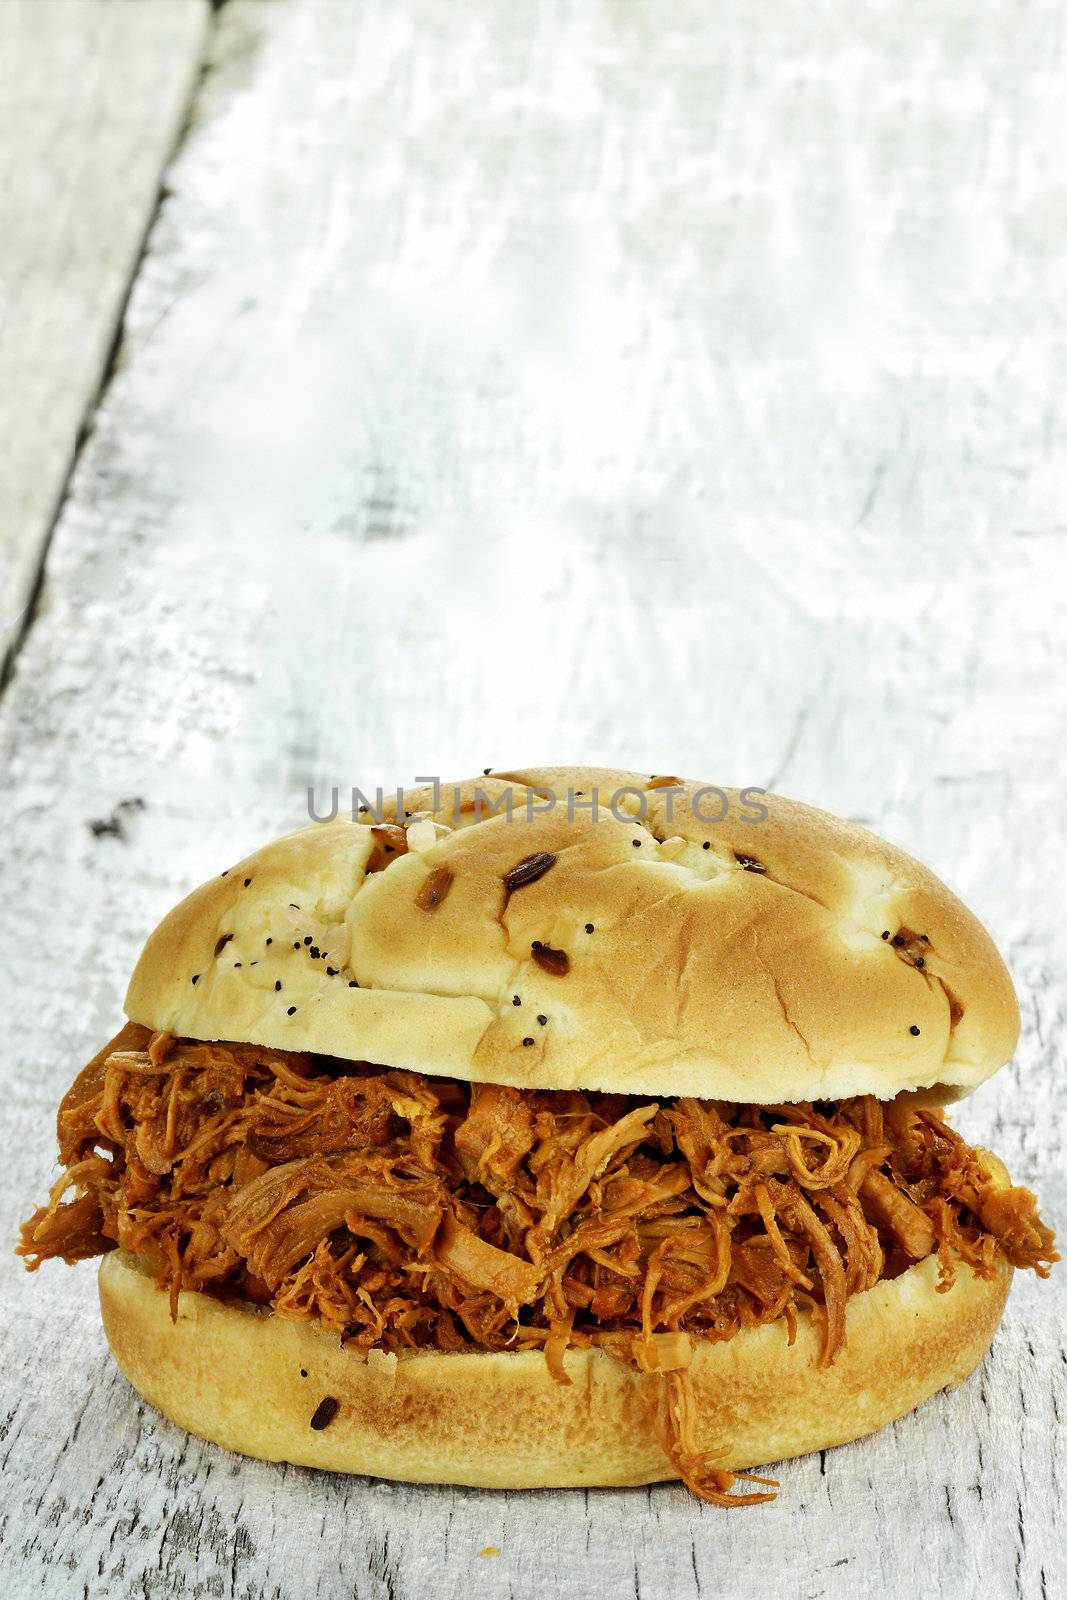 Pulled Chicken Sandwich by StephanieFrey